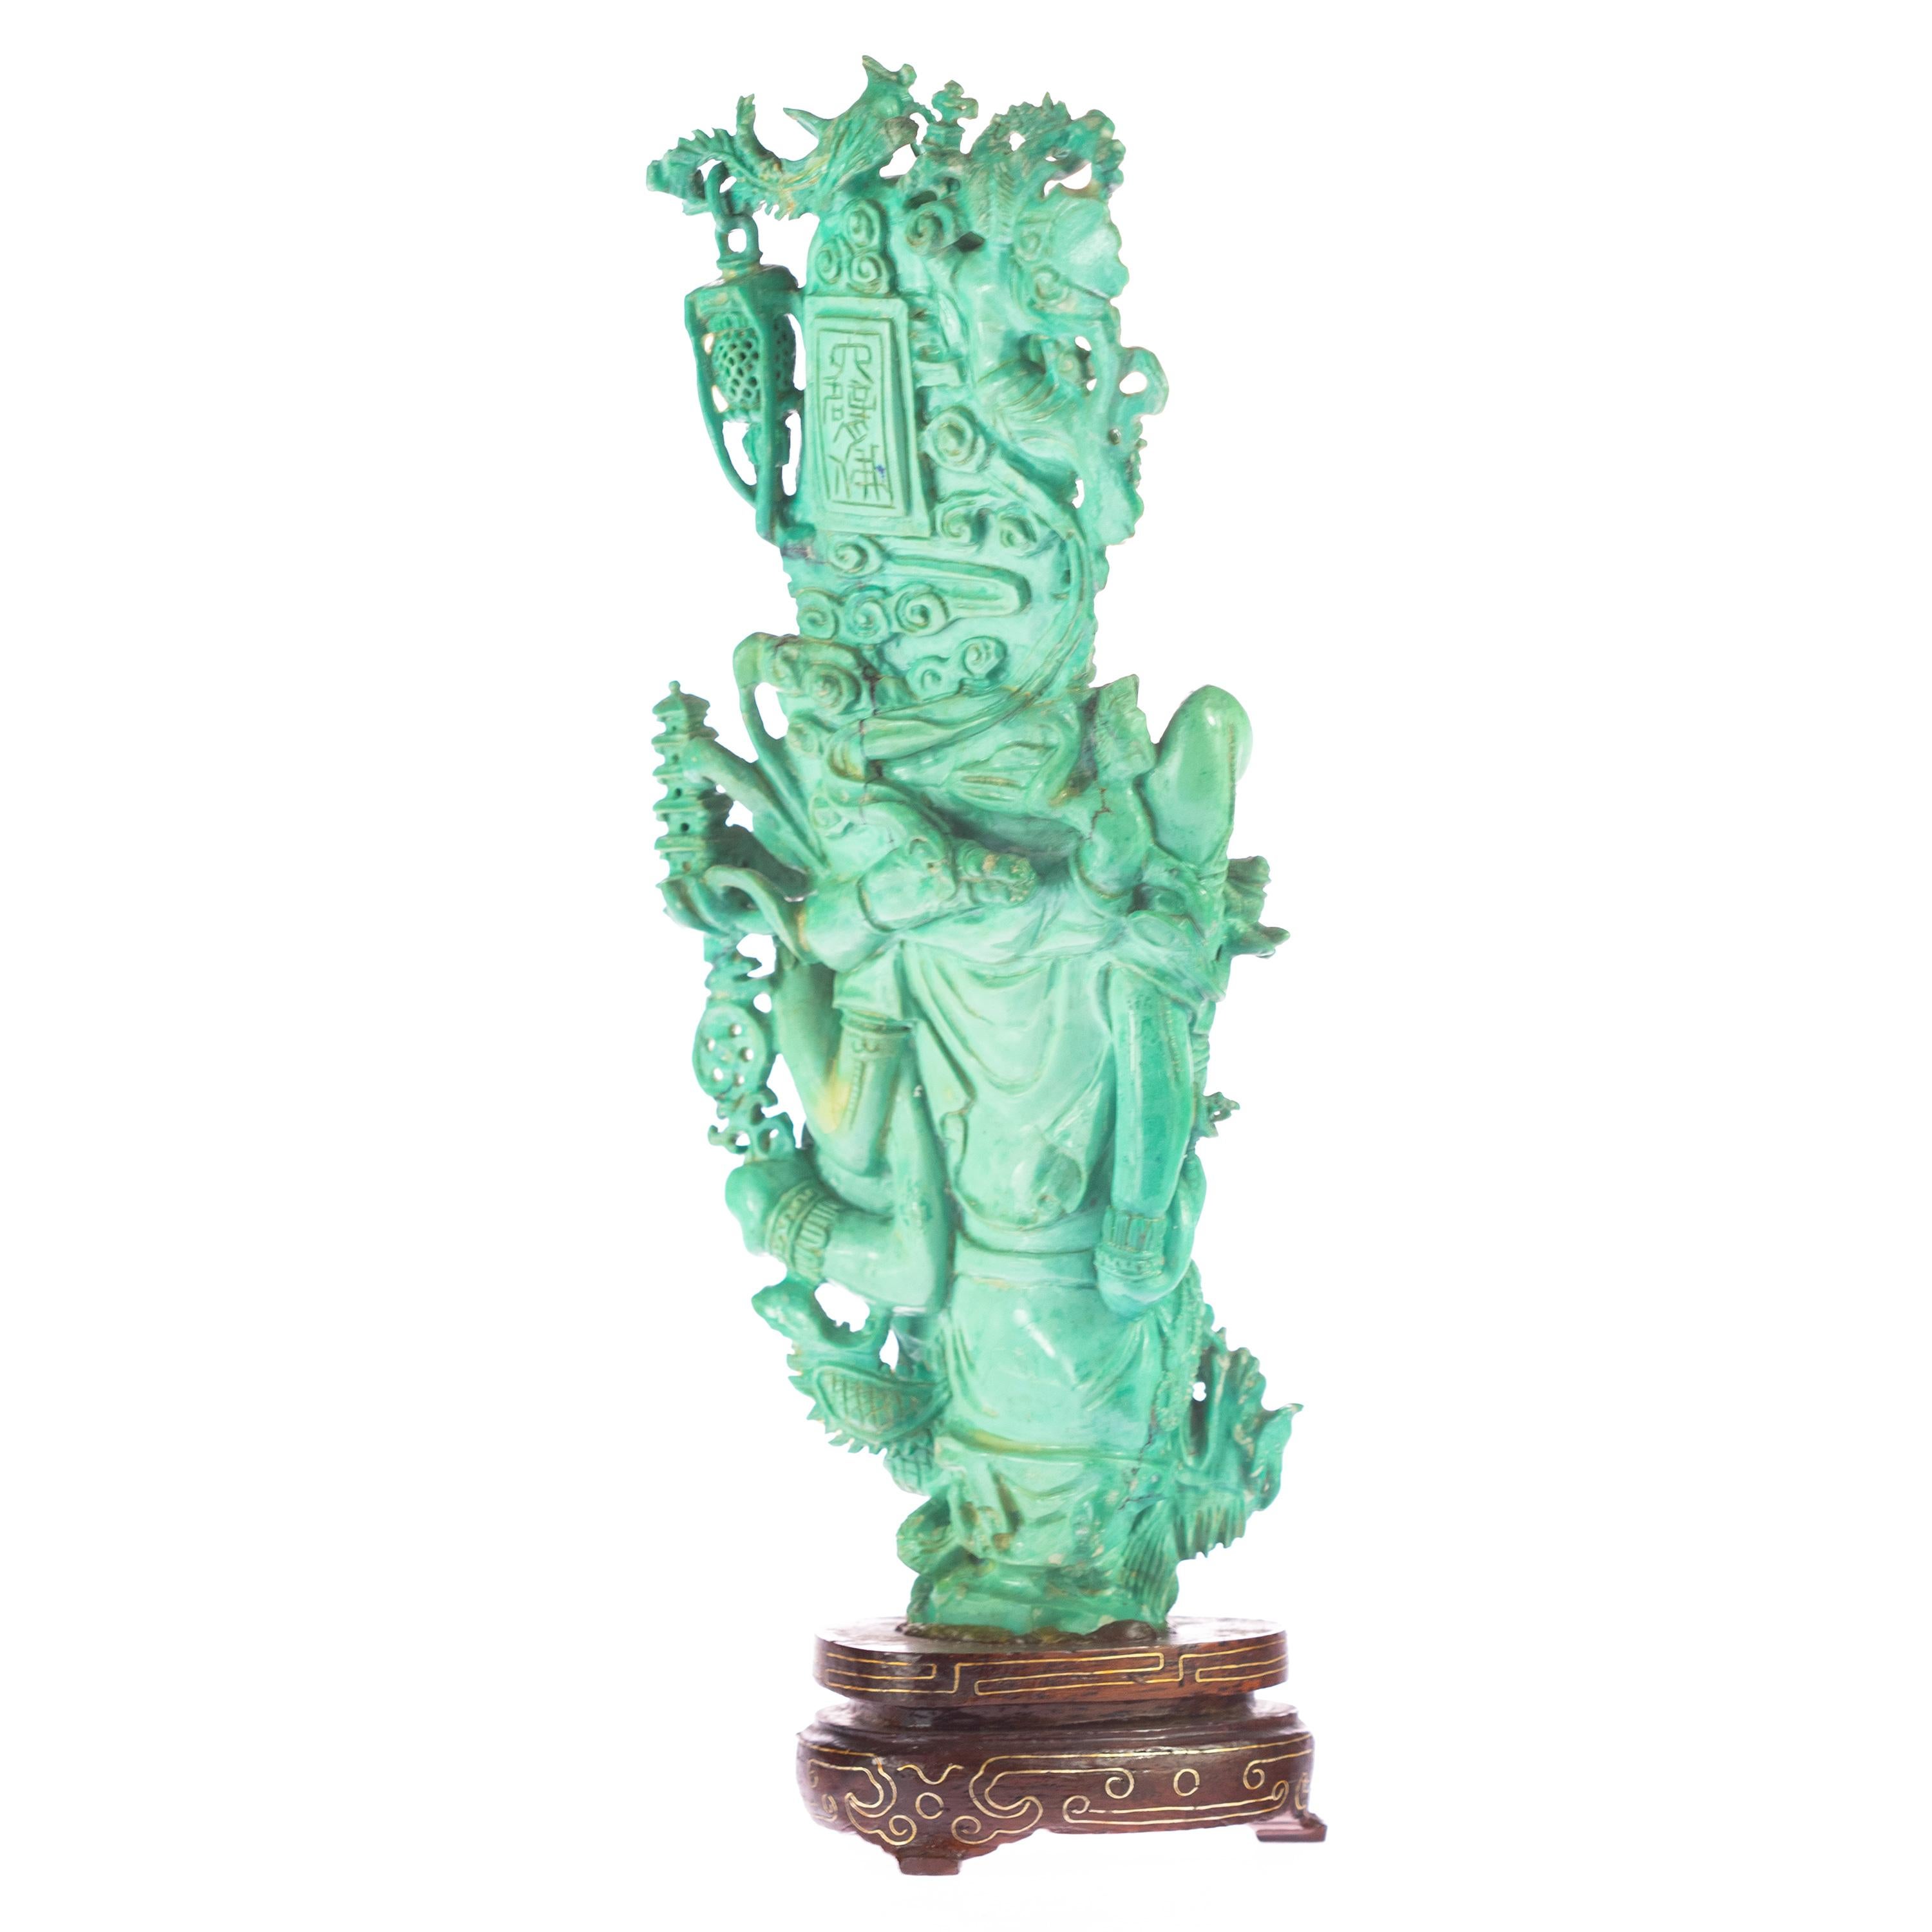 Chinese Turquoise Guanyin Bodhisattva Female Buddha Asian Art Carved Statue Sculpture For Sale